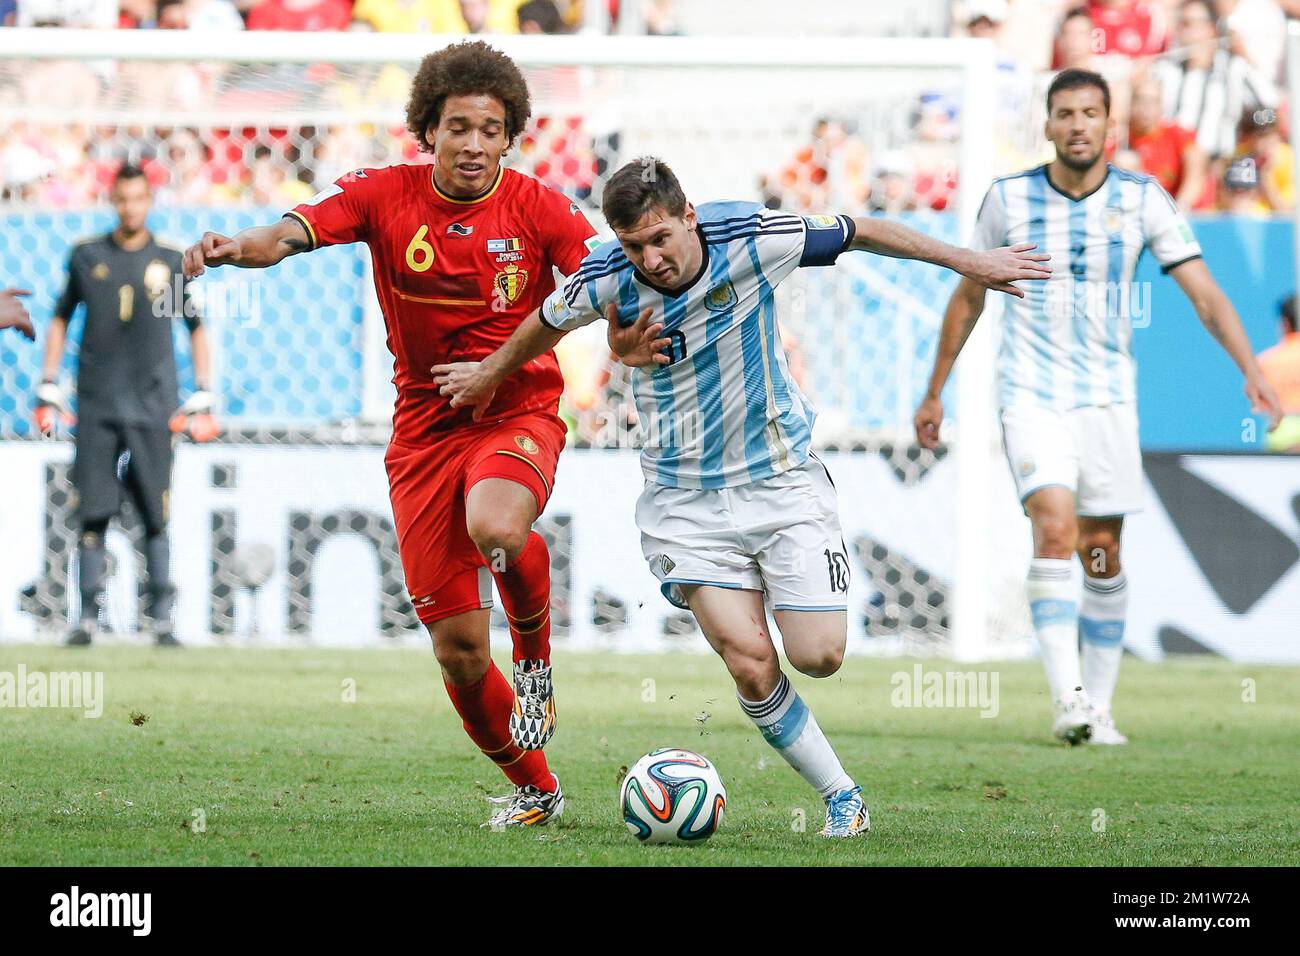 Belgium's Axel Witsel and Argentina's Lionel Messi fight for the ball during the quarter final match between Belgian national soccer team Red Devils and Argentina, in Estadio Nacional Mane Garrincha, in Brasilia, Brazil, during the 2014 FIFA World Cup, Saturday 05 July 2014.  Stock Photo